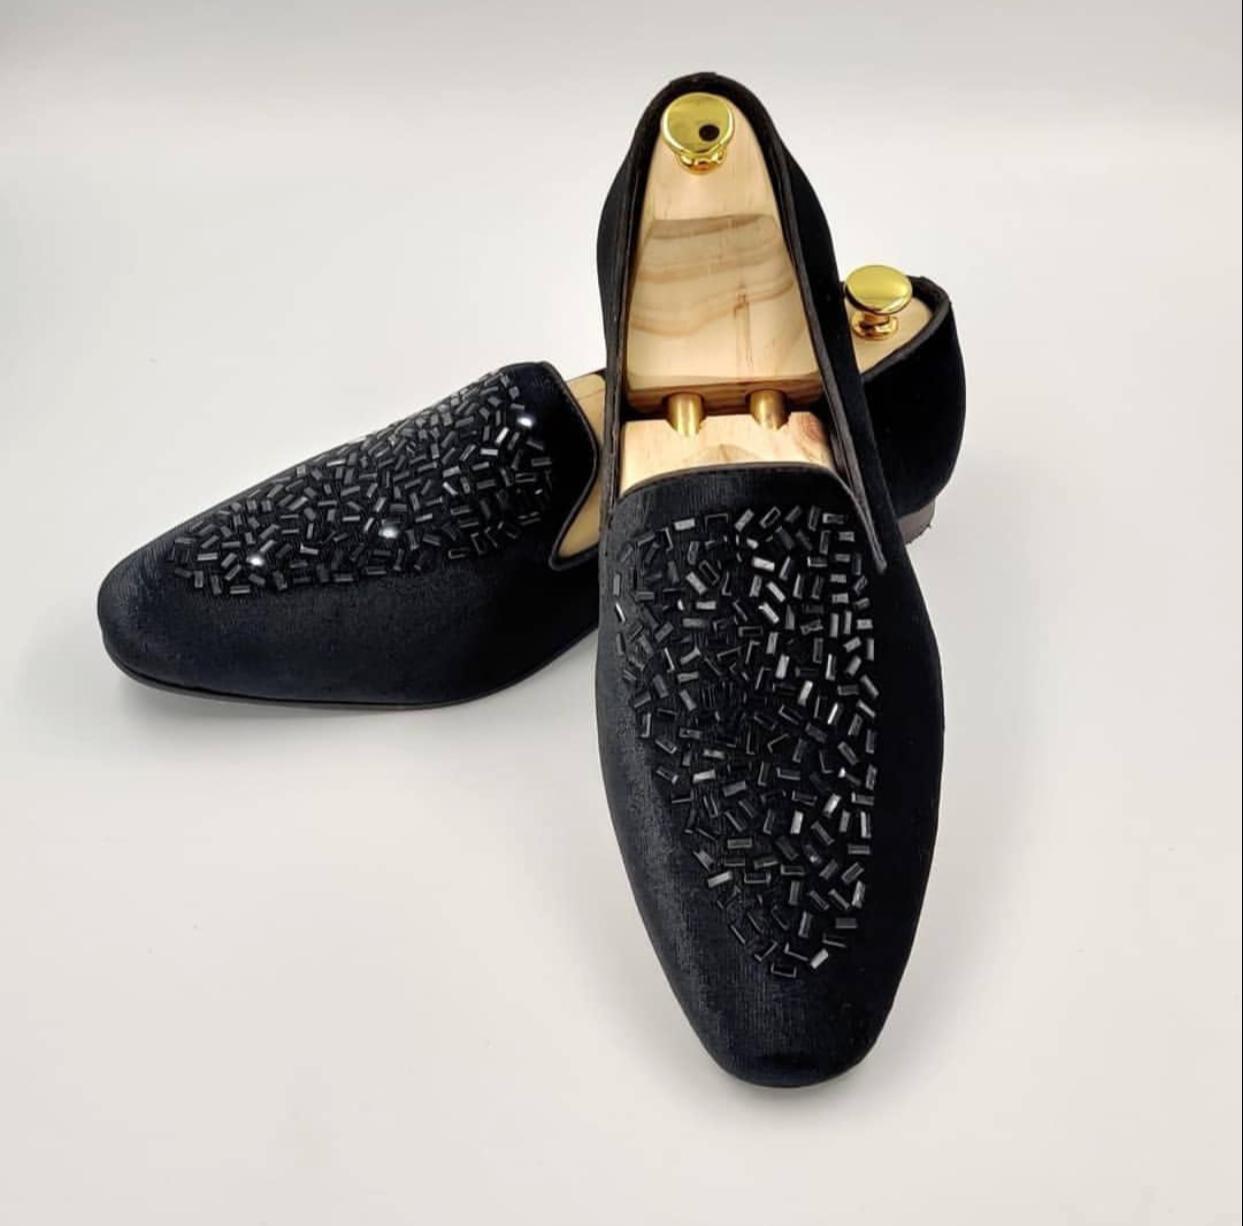 Fashion Wedding Revert Moccasins For Men's High Quality Slip On Flat Loafer-Unique and Classy